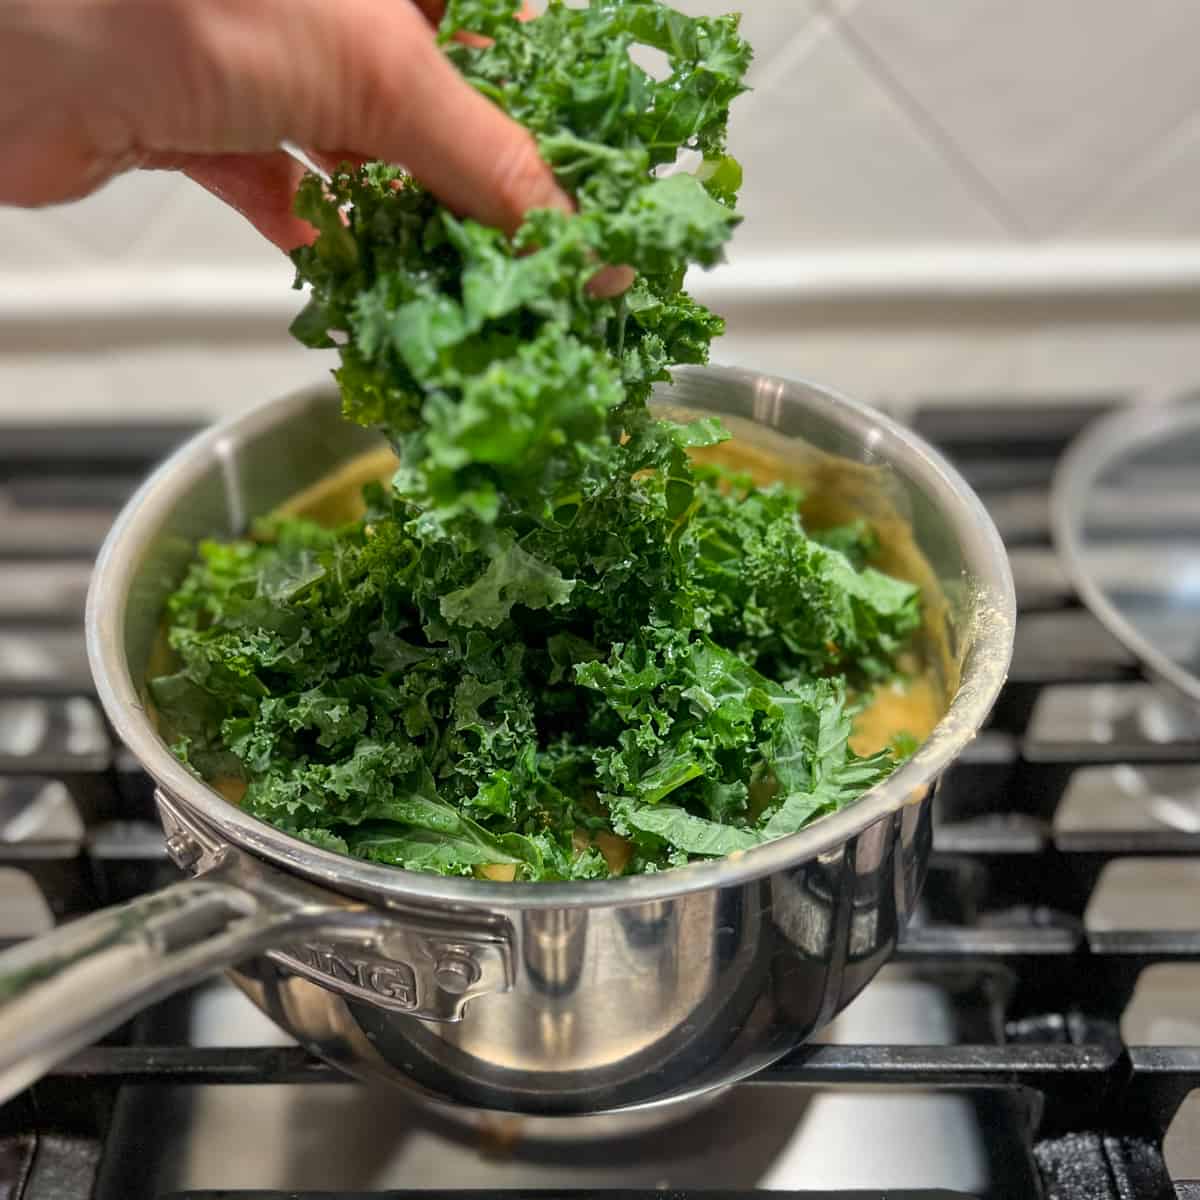 top side view of fresh chopped kale being added to the soup mixture in the pot on the stovetop